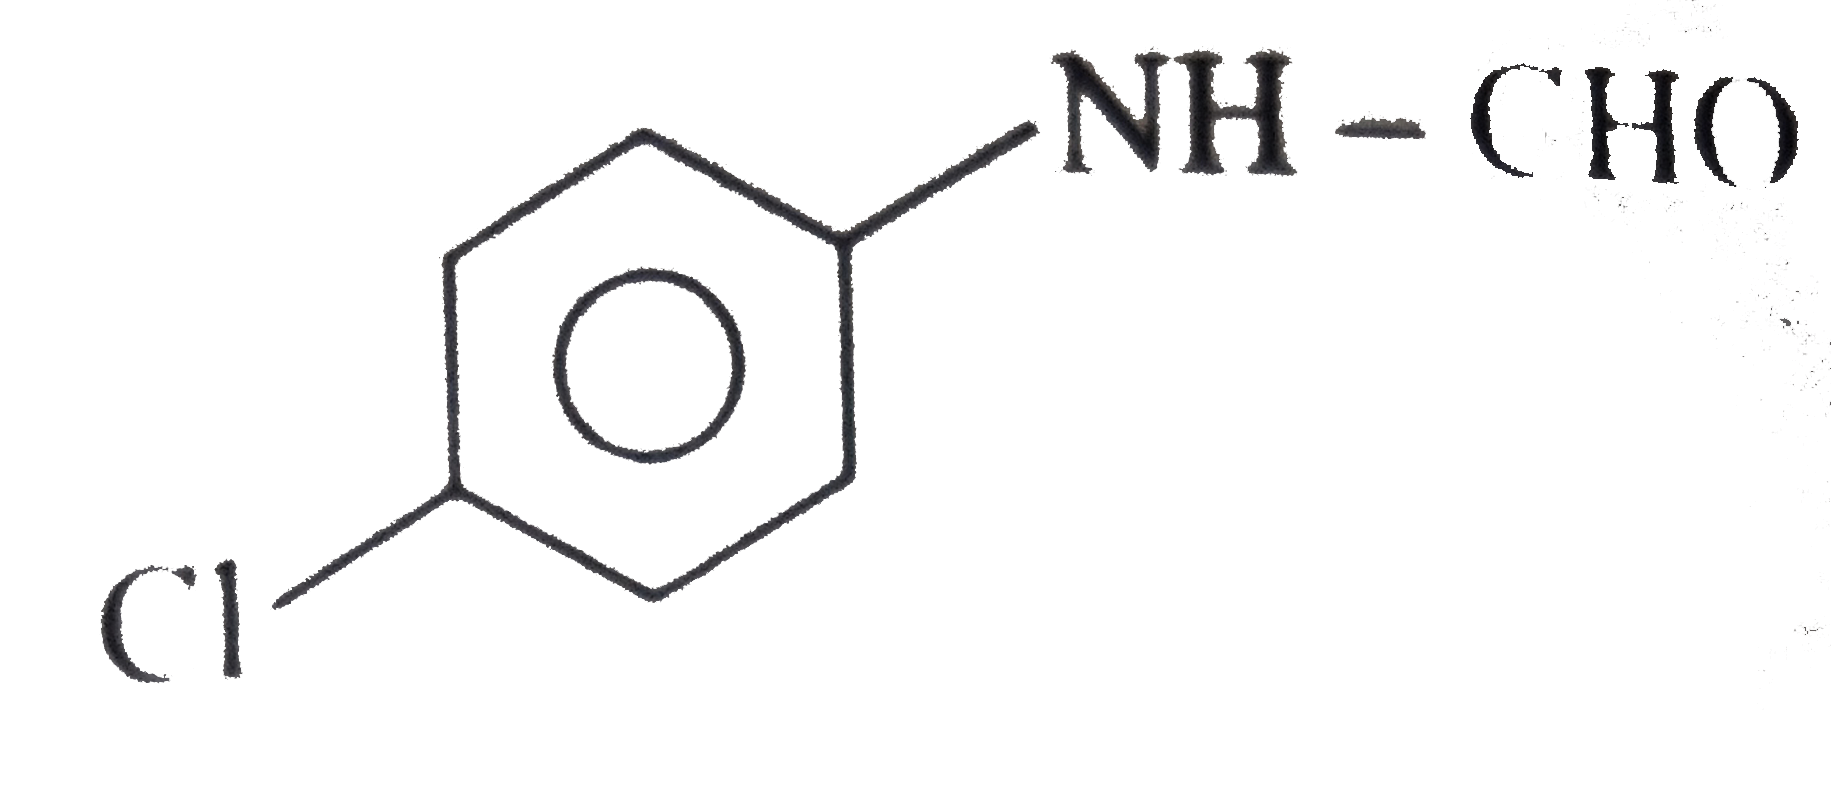 The correct IUPAC name of the compound.